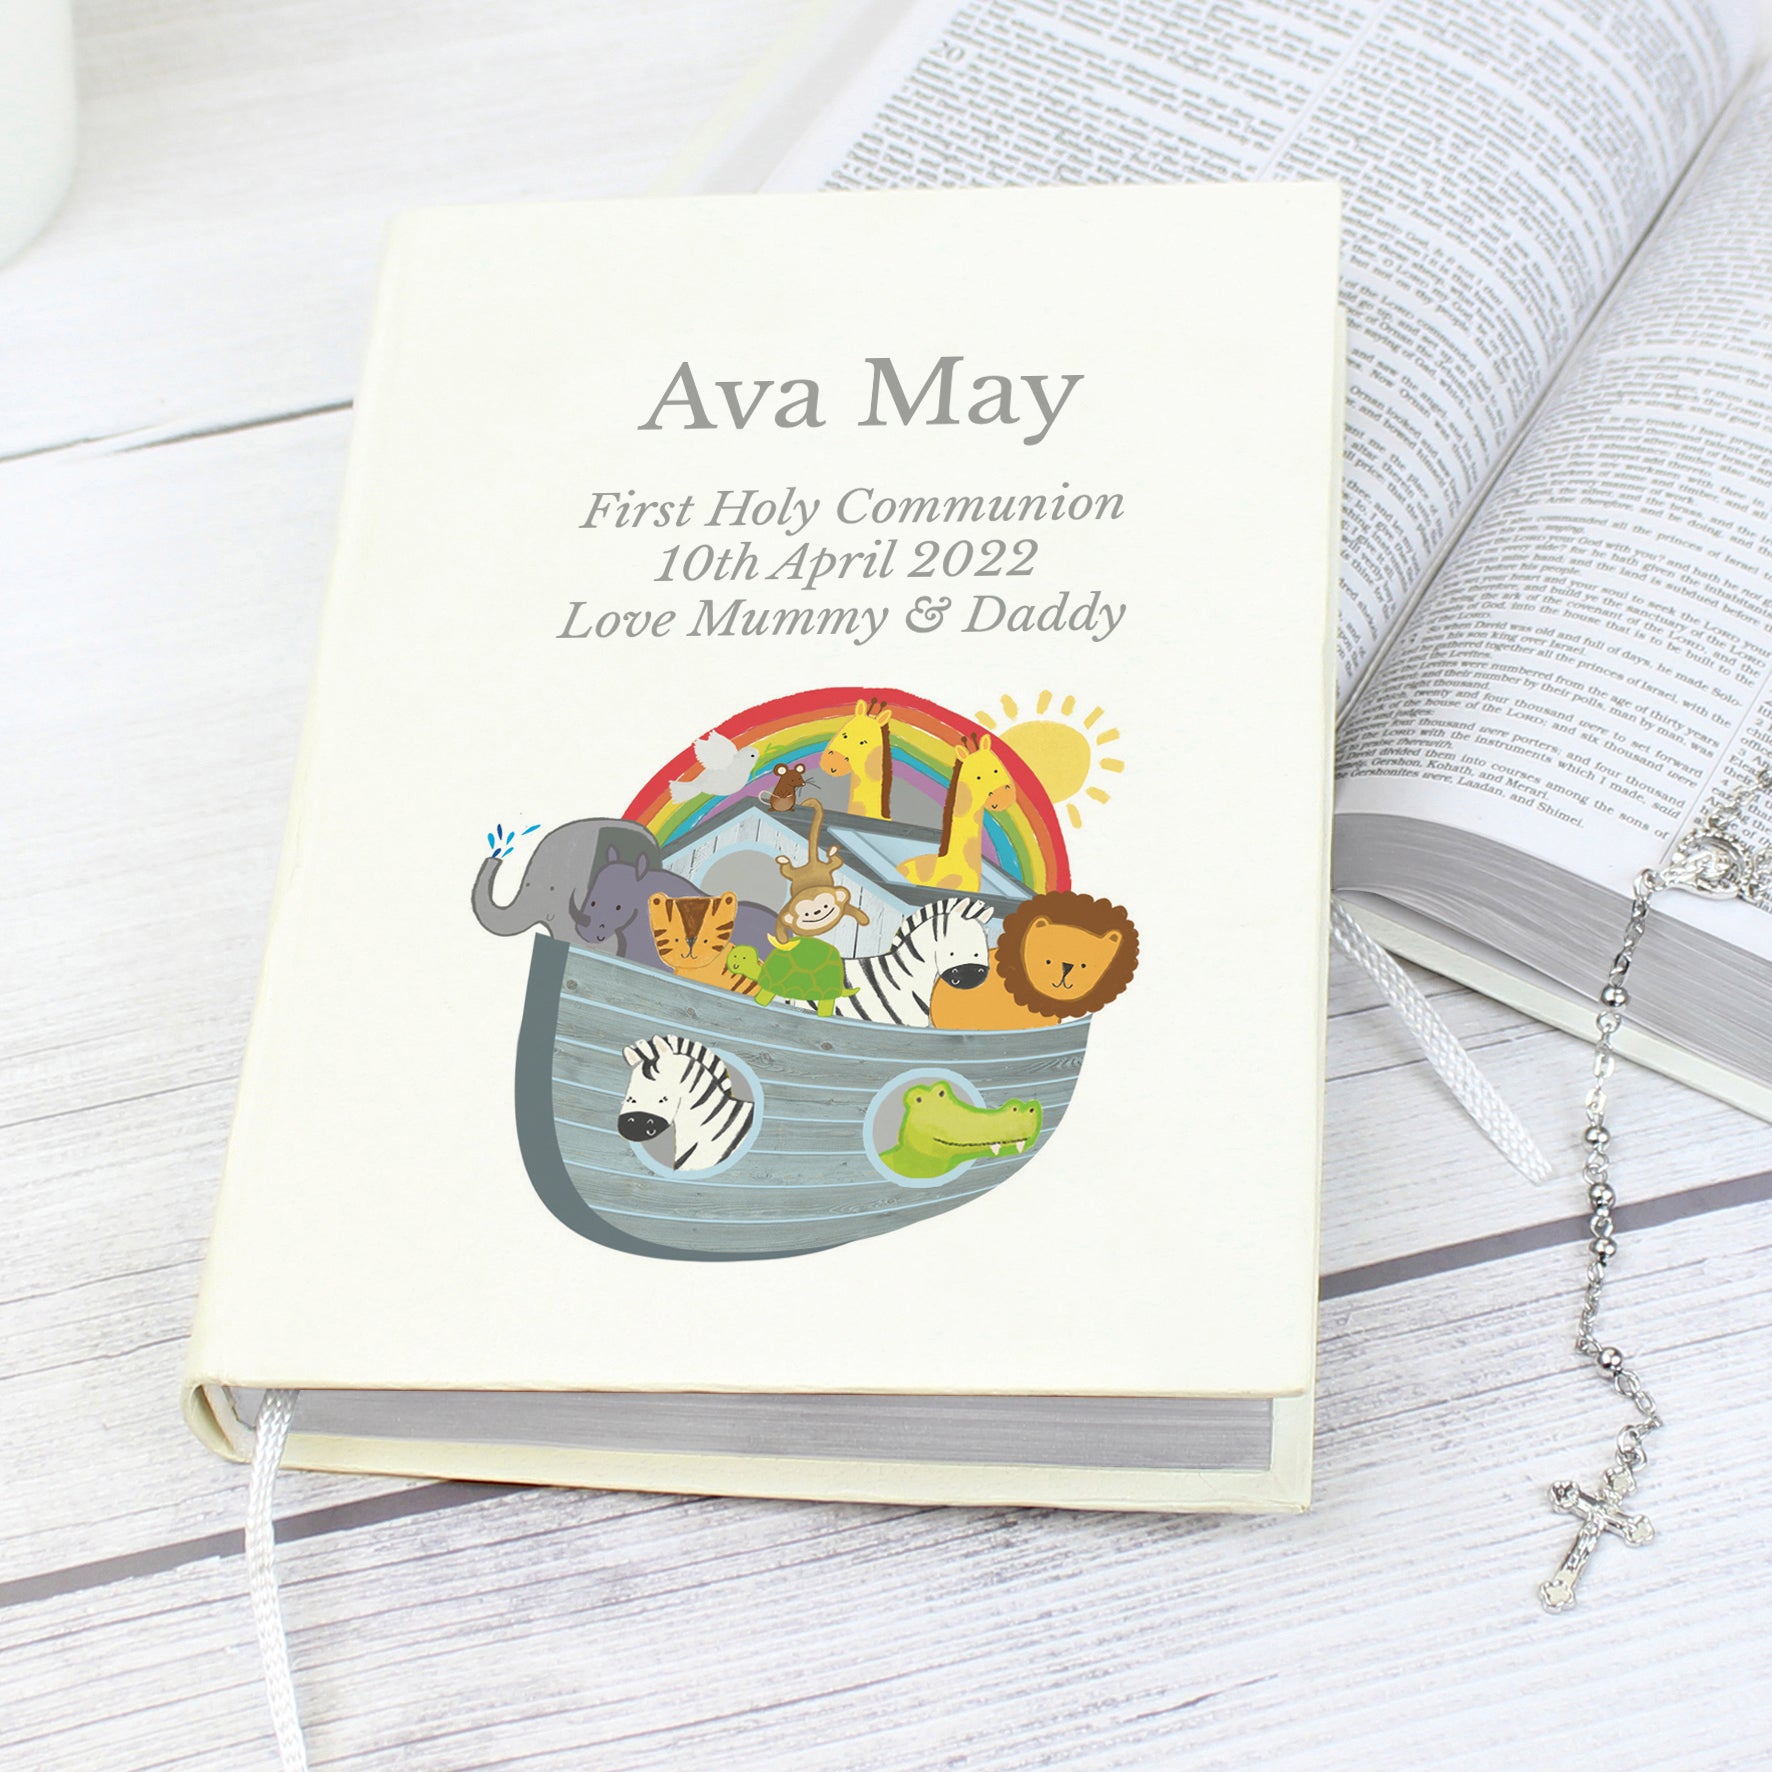 Personalised Noahs Ark Holy Bible - Eco-friendly | Free Delivery